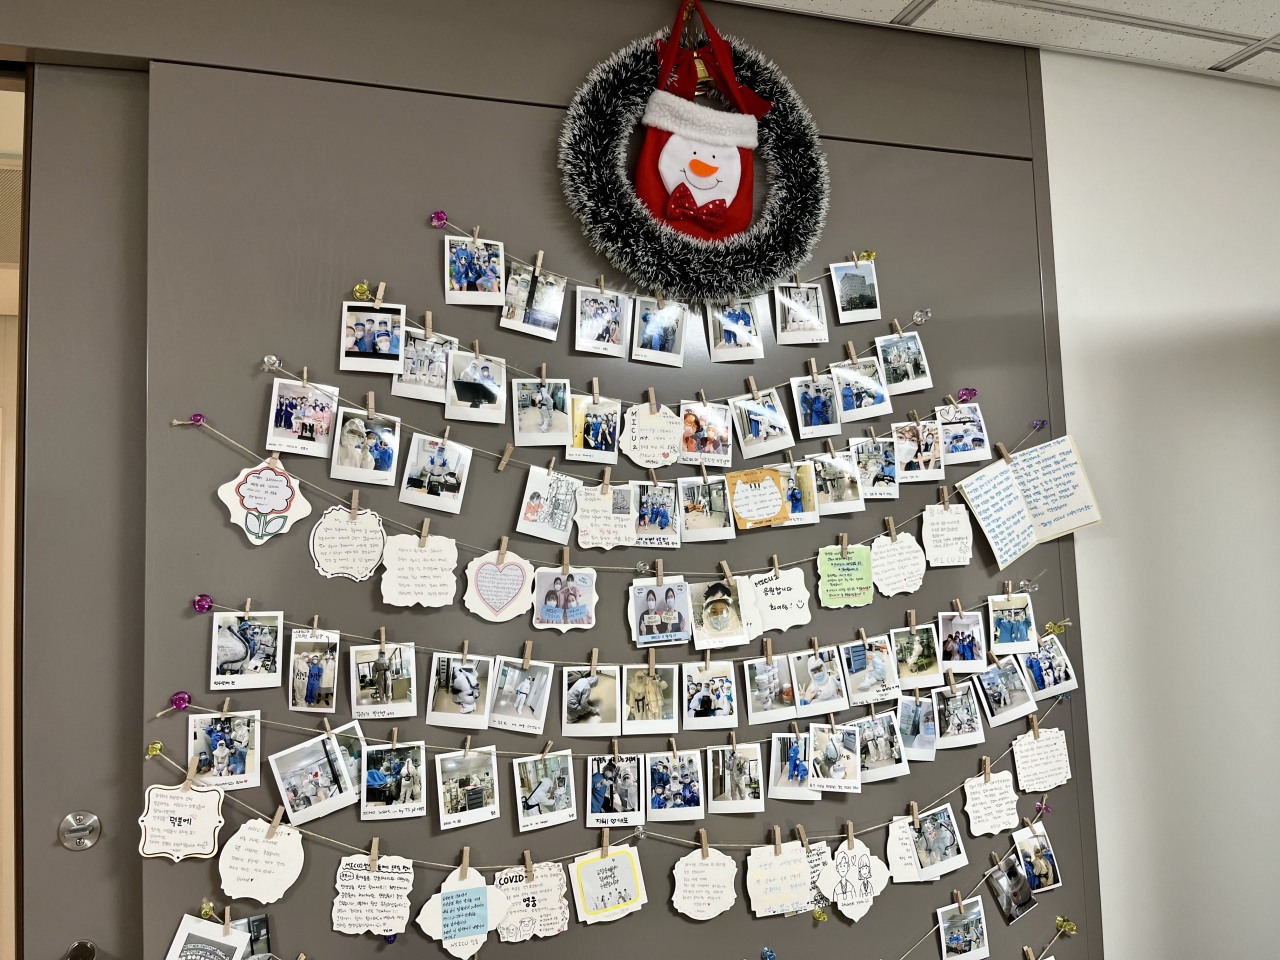 On one the walls of the changing room, polaroid photographs and cards are hung in the shape of a Christmas tree. “So proud of our nursing team looking after severe COVID-19 patients. Thank you all for everything,” read one of the messages. Another read, “Go coronavirus ICU team. We can do this.” (Kim Arin/The Korea Herald)